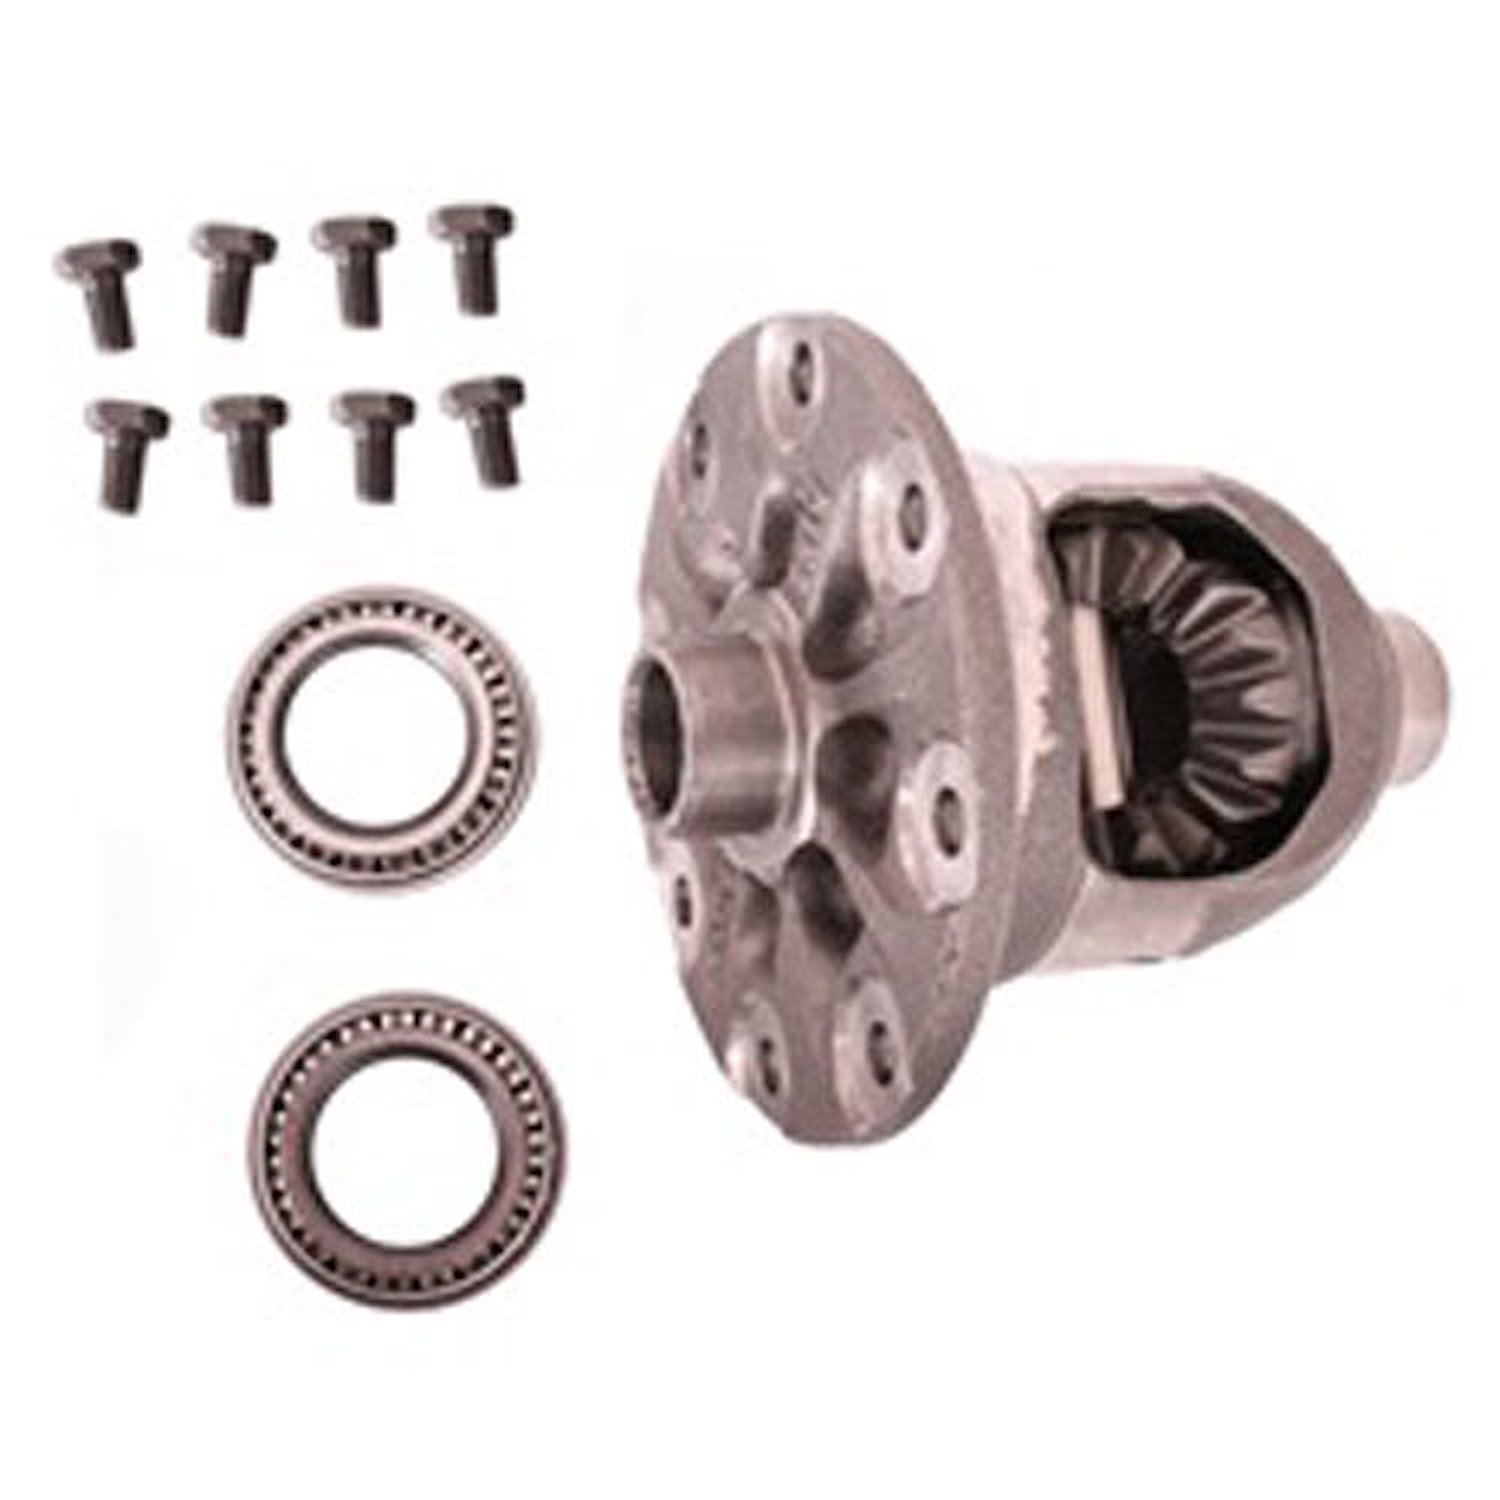 This Tru-Lok differential carrier assembly from Omix-ADA fits Dana 44 rear differentials found in 07